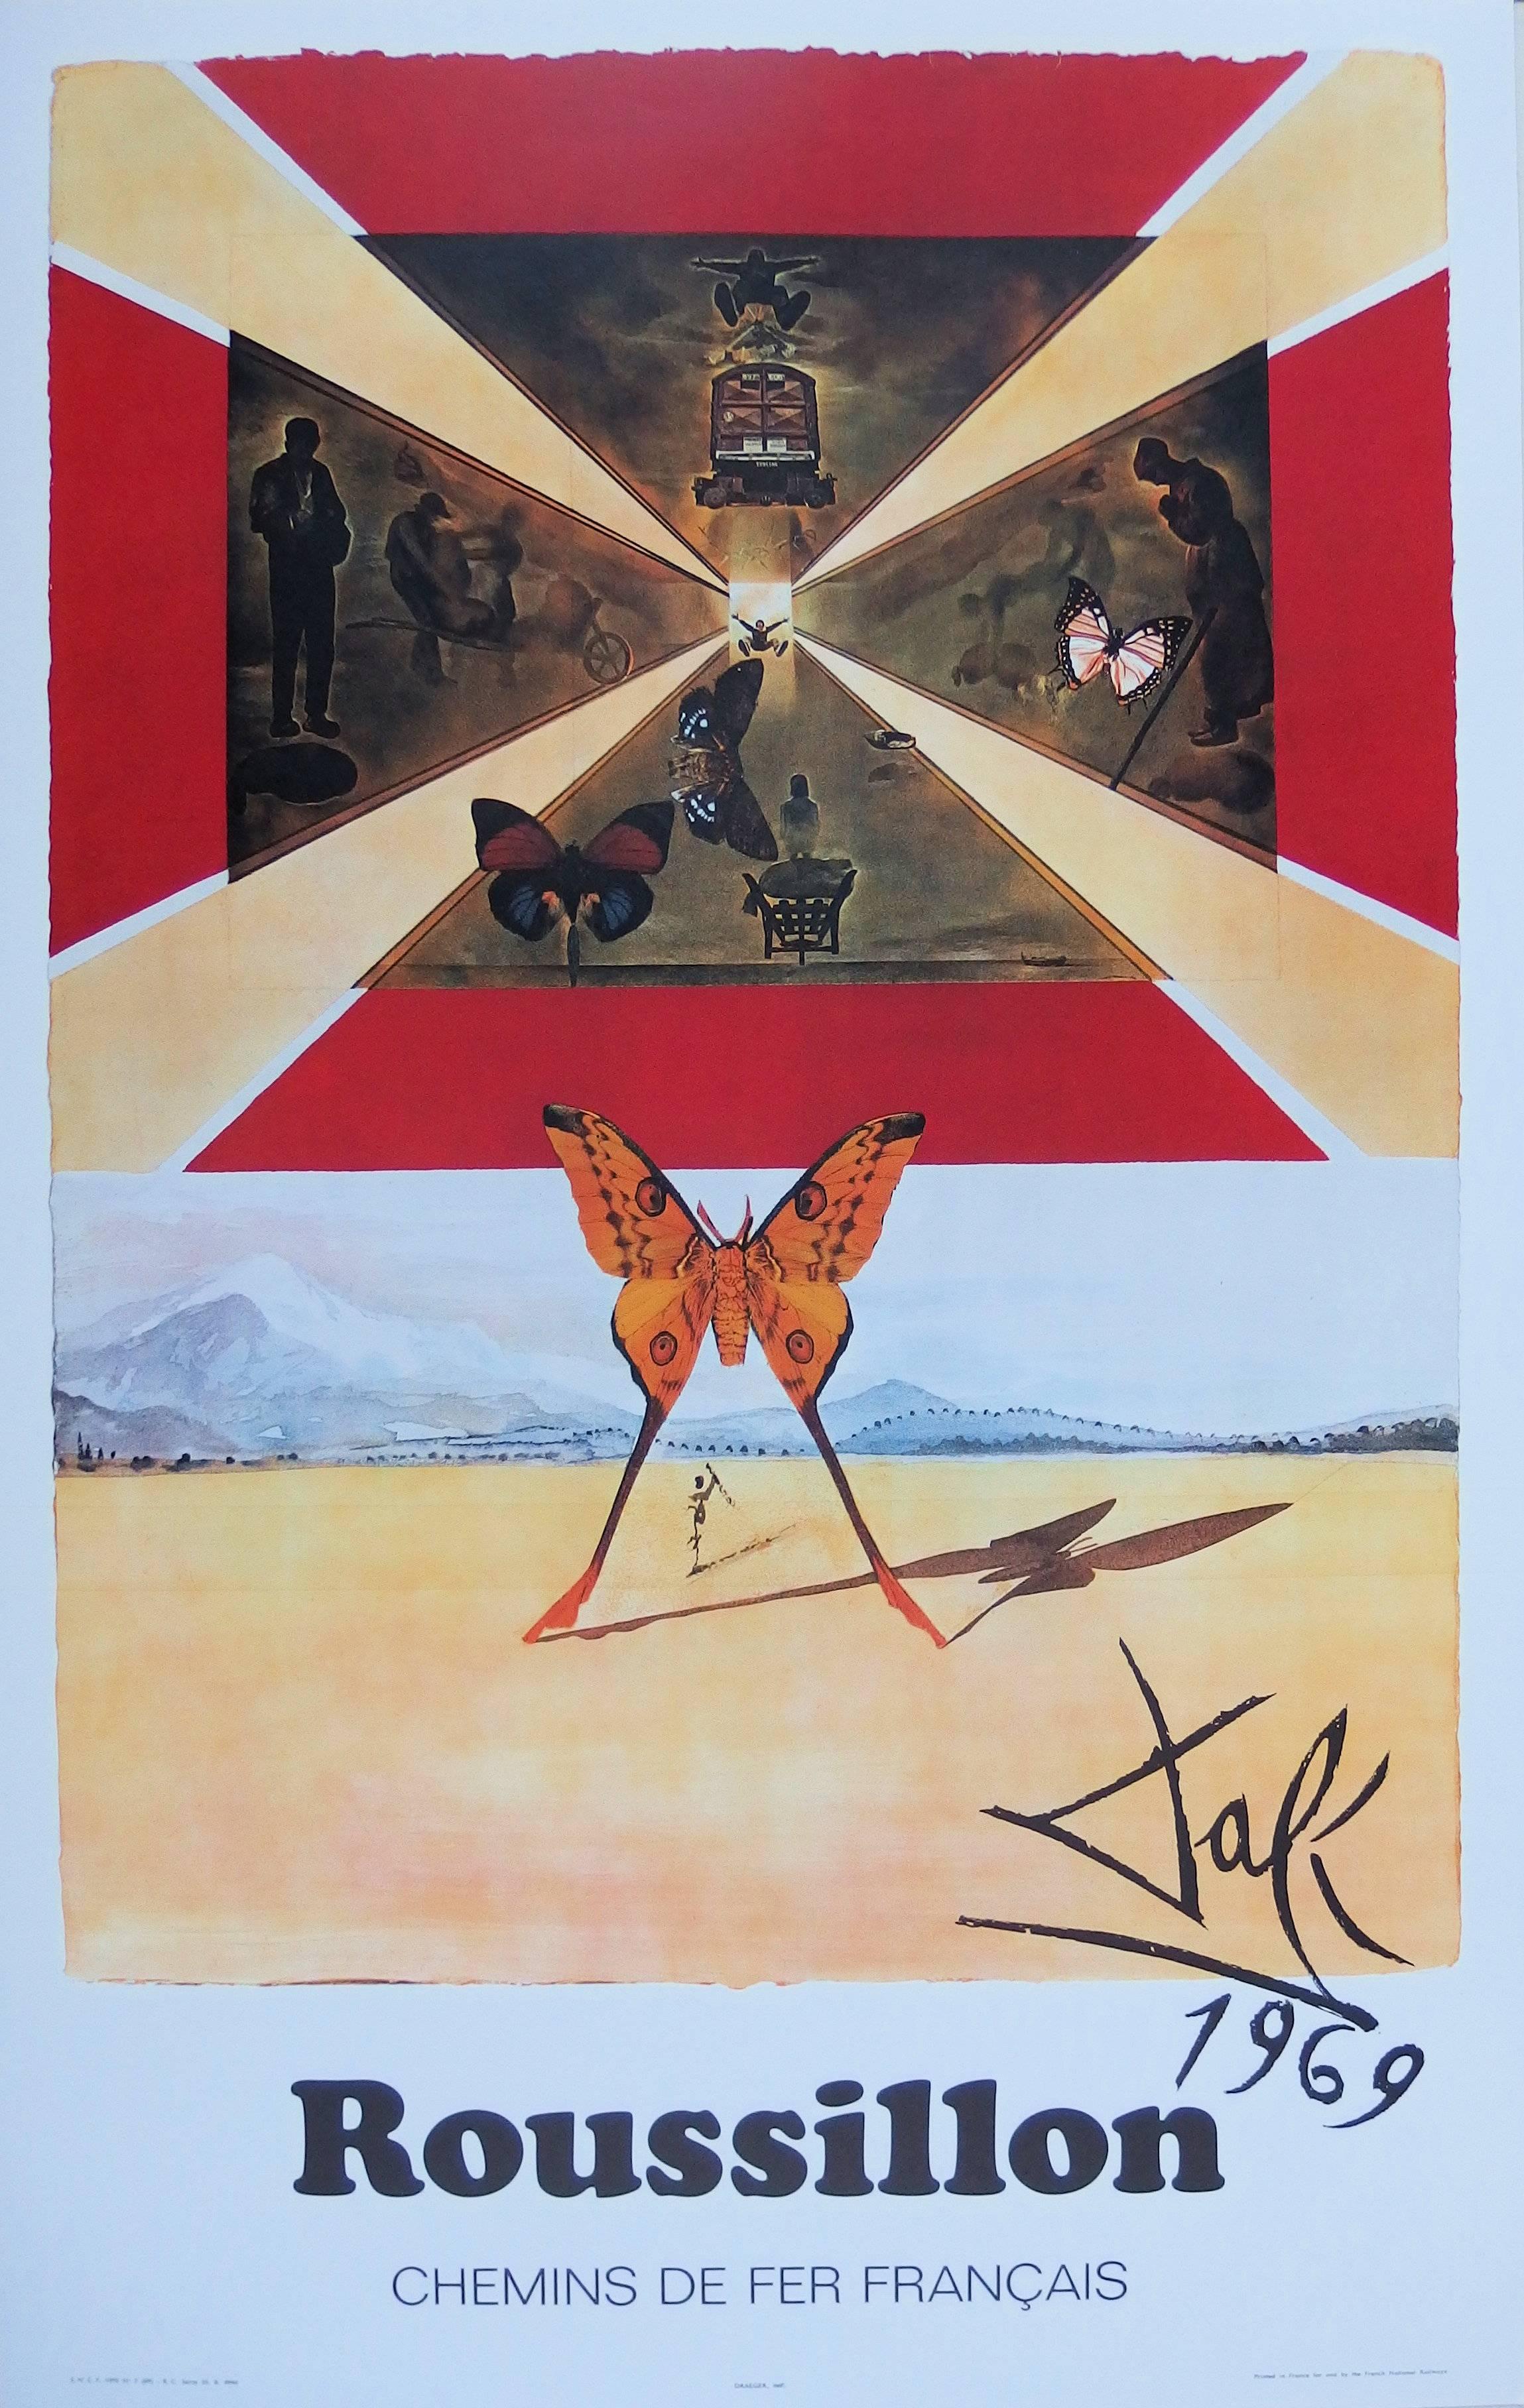 (after) Salvador Dali Figurative Print - Butterfly suite : Roussillon - Original lithograph - Tall size, 1969